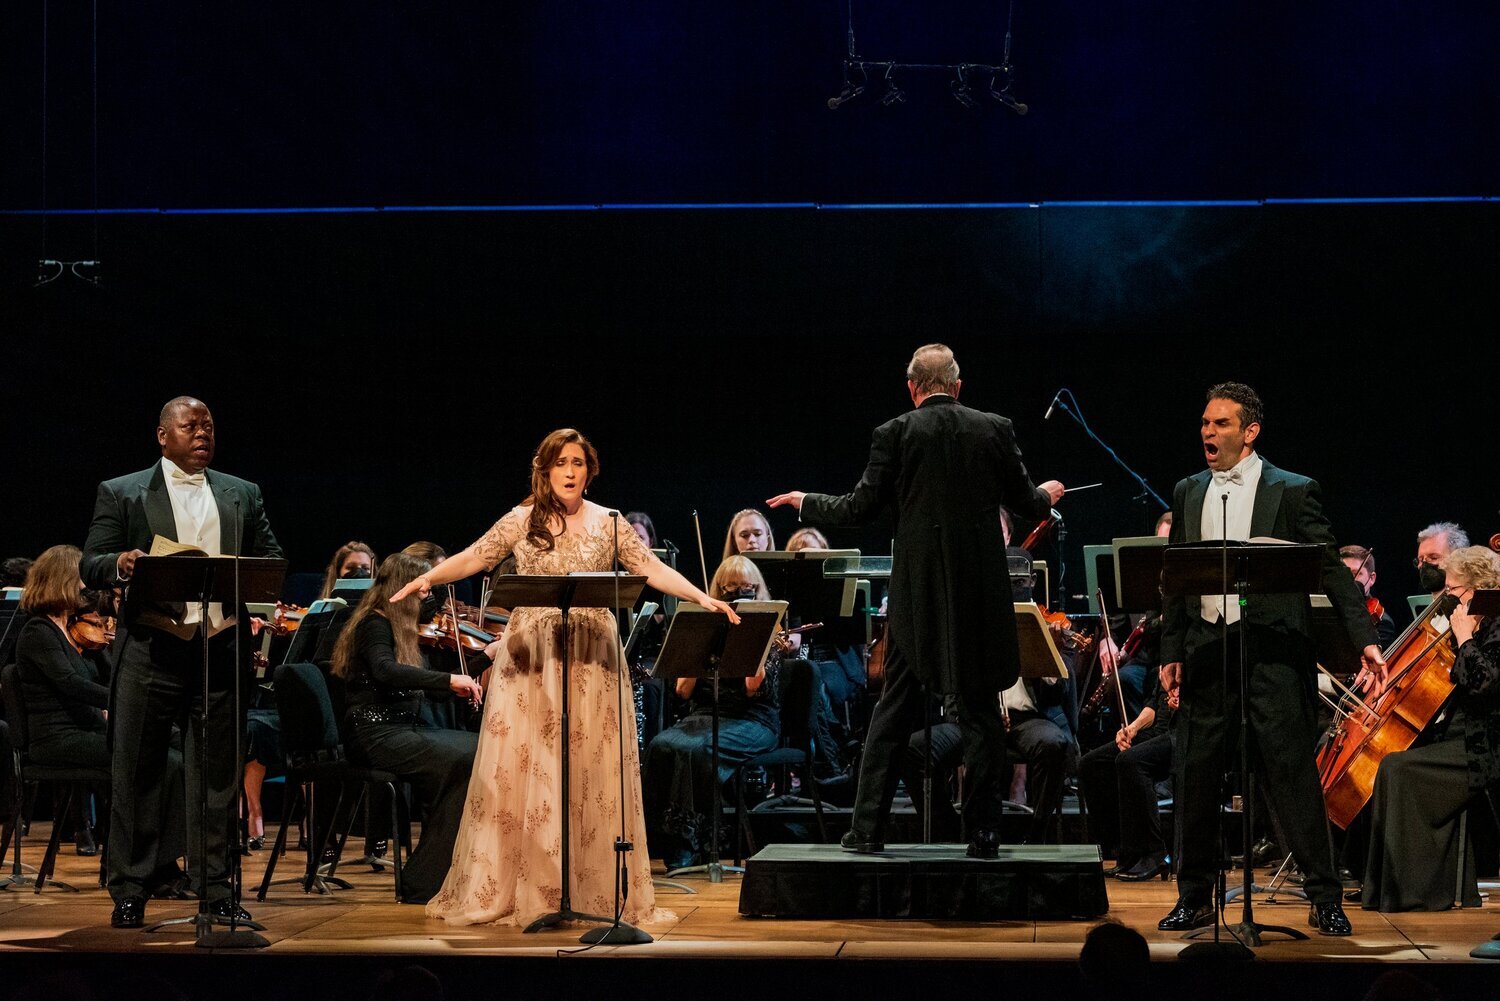 How Can An Opera Singer Be Heard Over An Orchestra